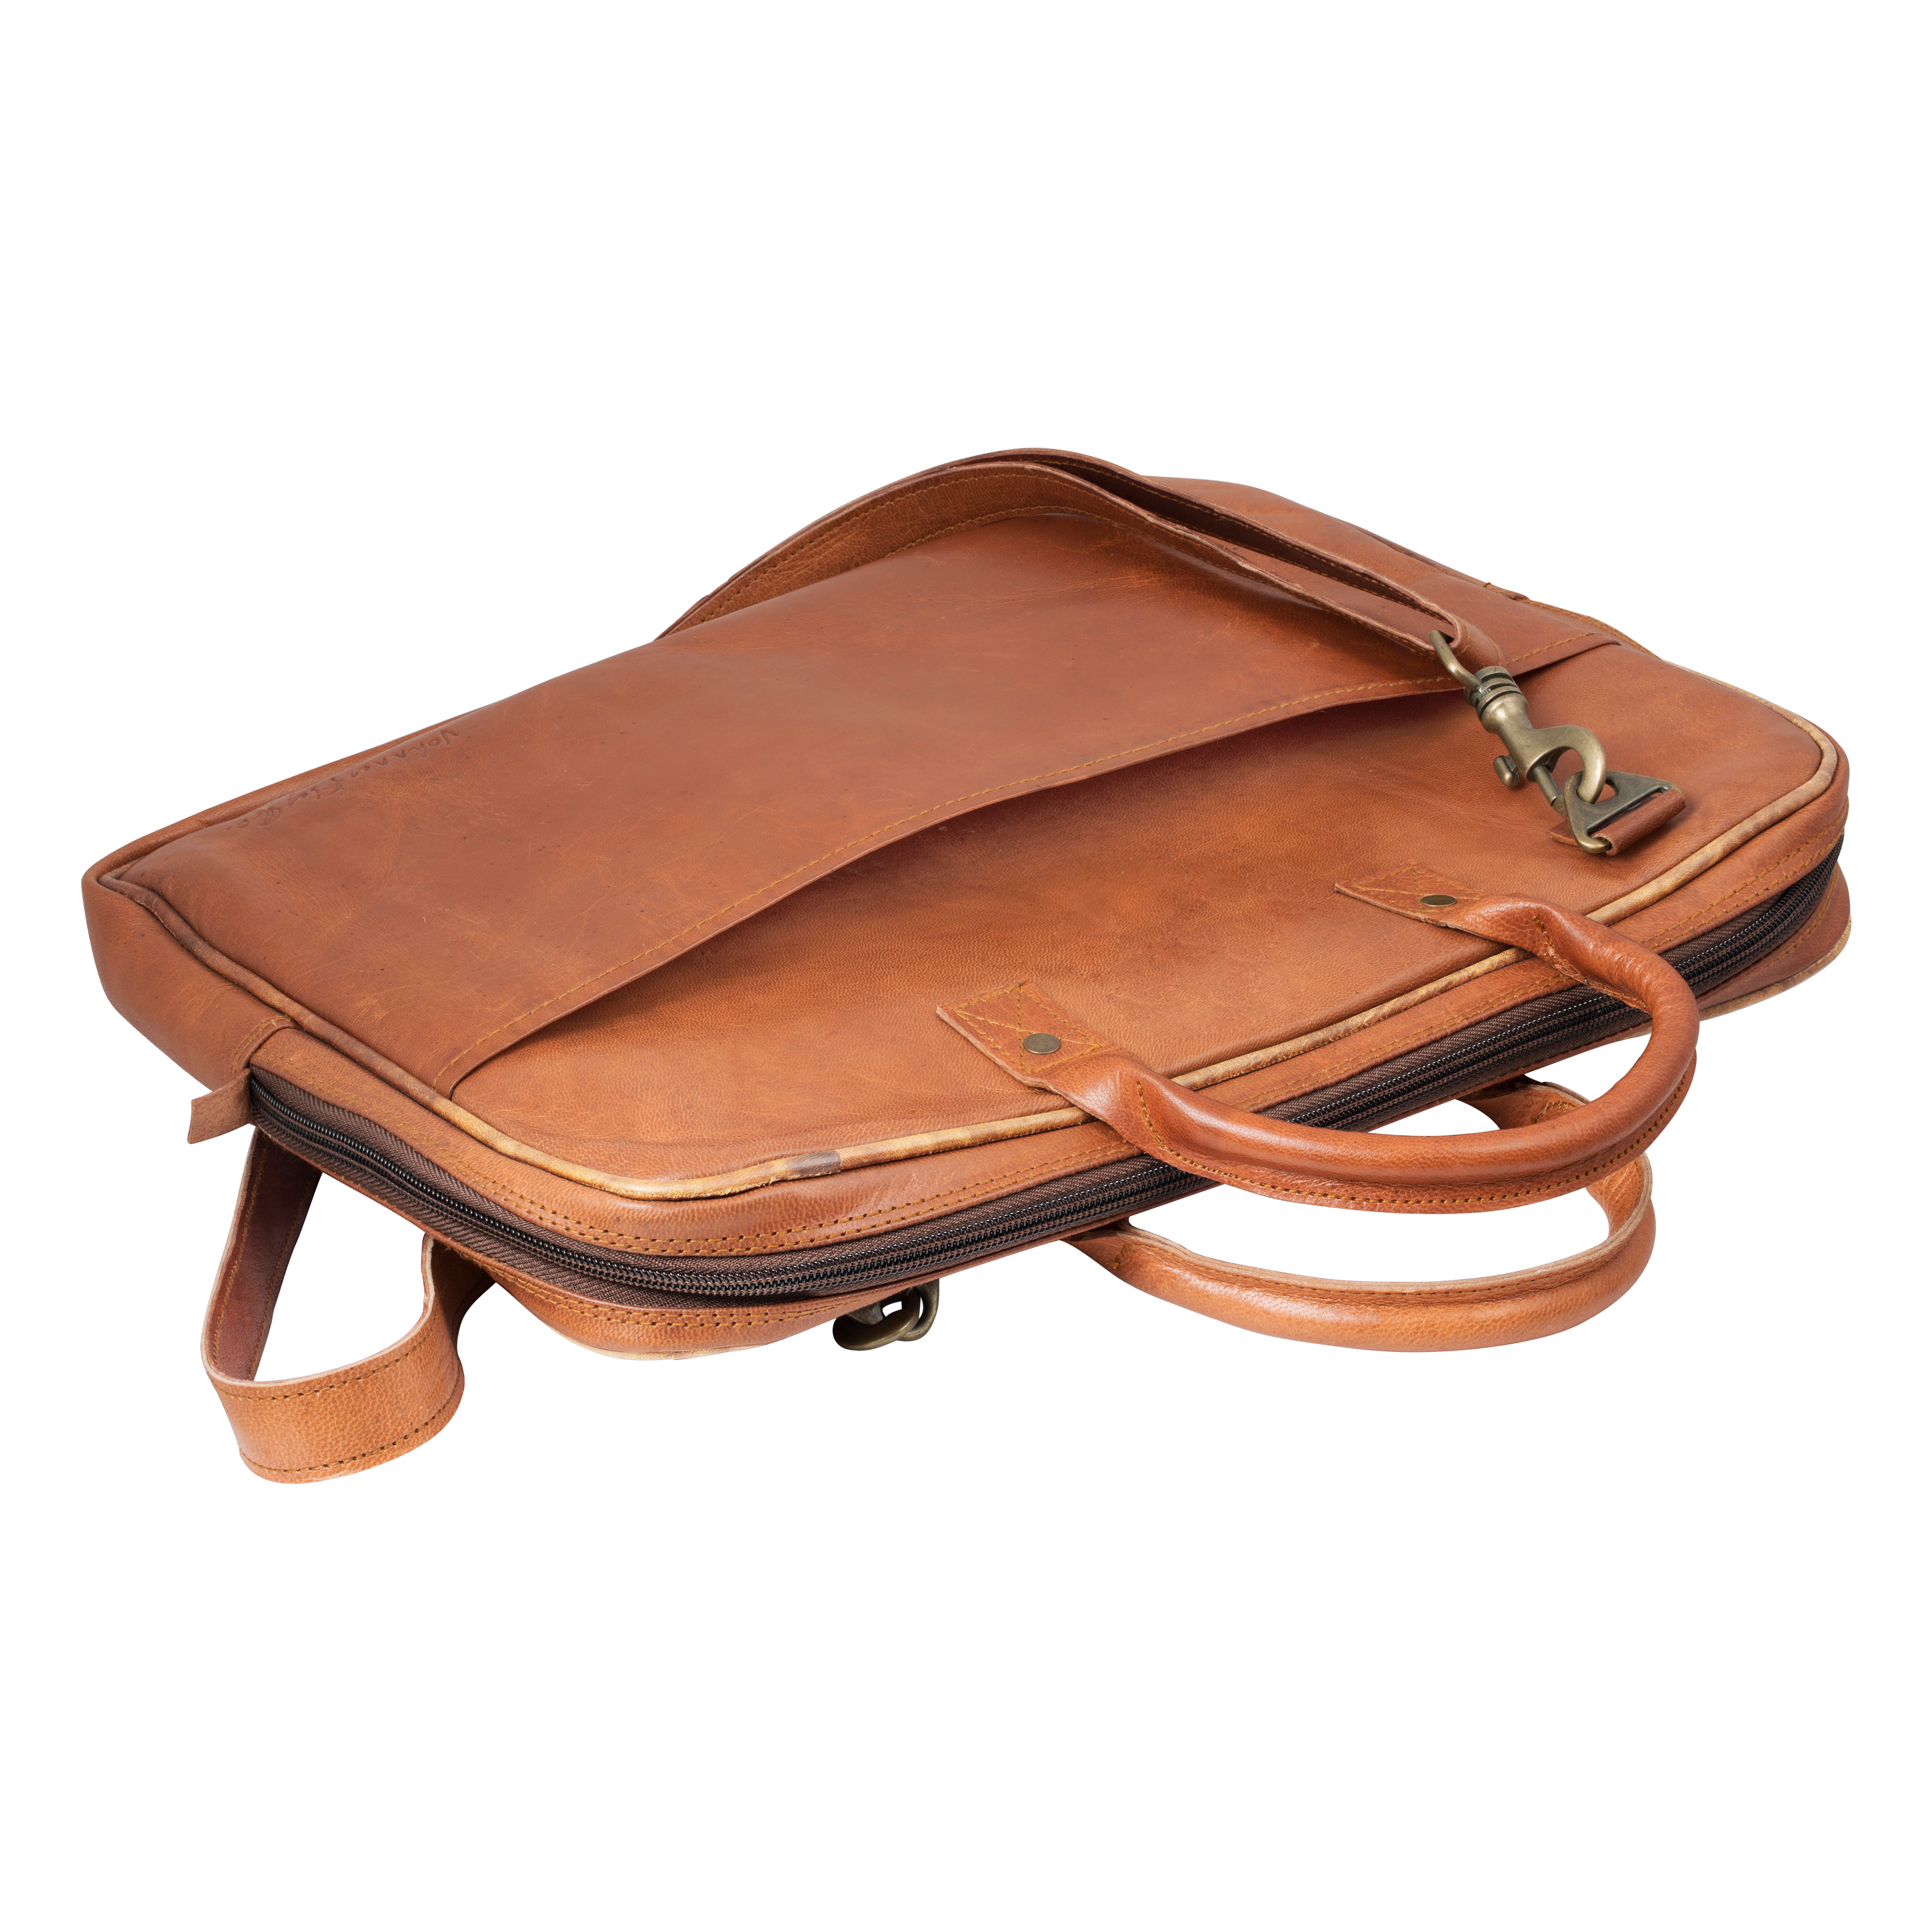 Laptop sling bag - Johnny Fly - Leather Bags